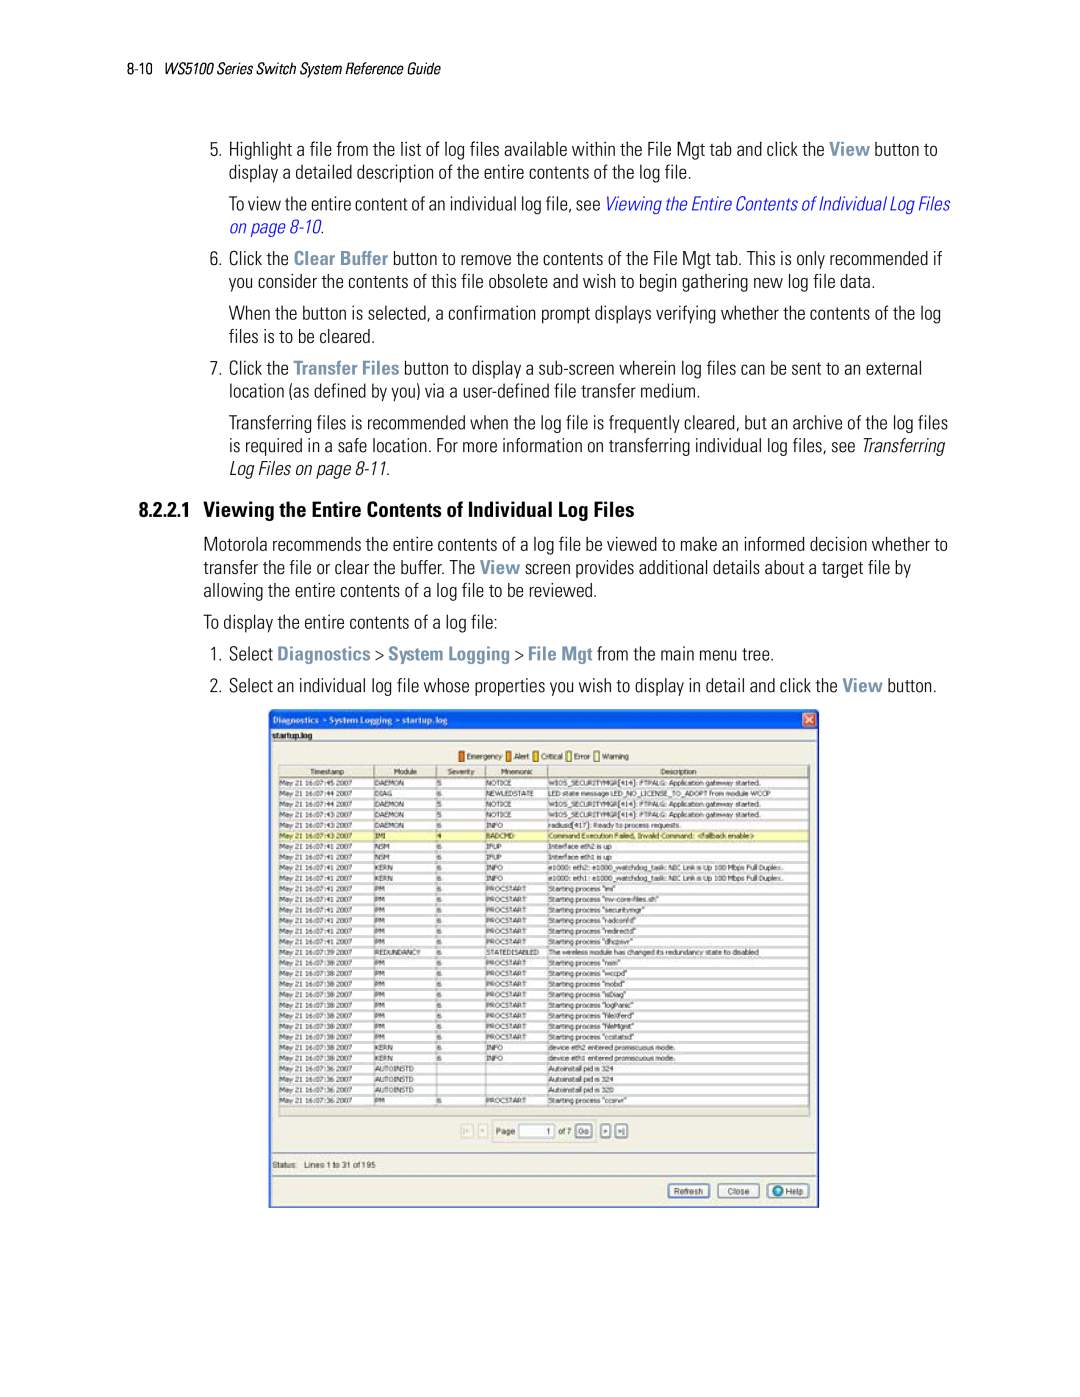 Motorola WS5100 manual To display the entire contents of a log file 